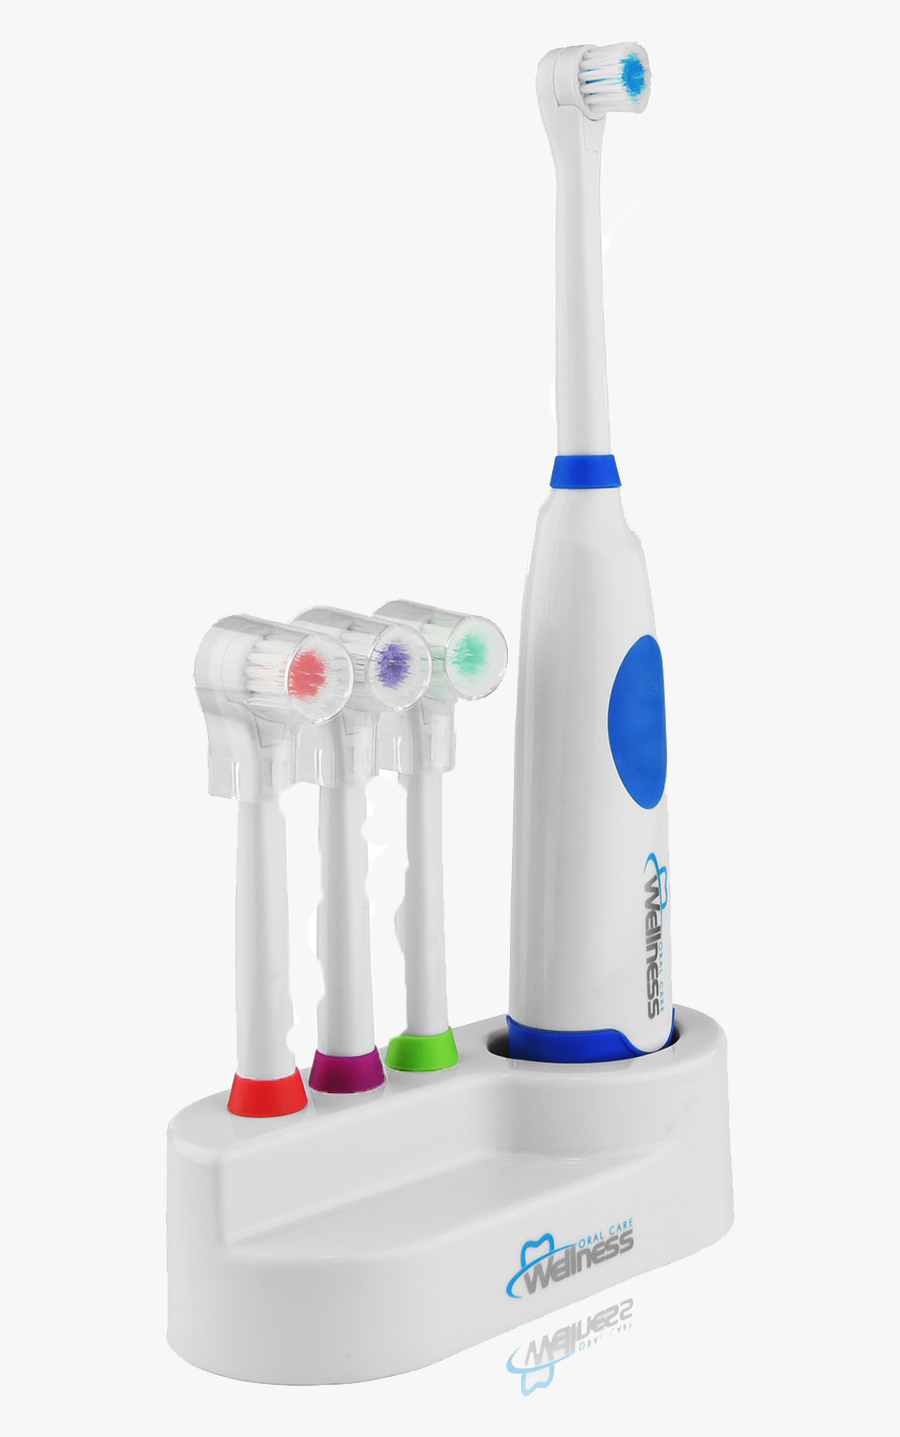 Toothbrush Png Pic - Toothbrush, Transparent Clipart